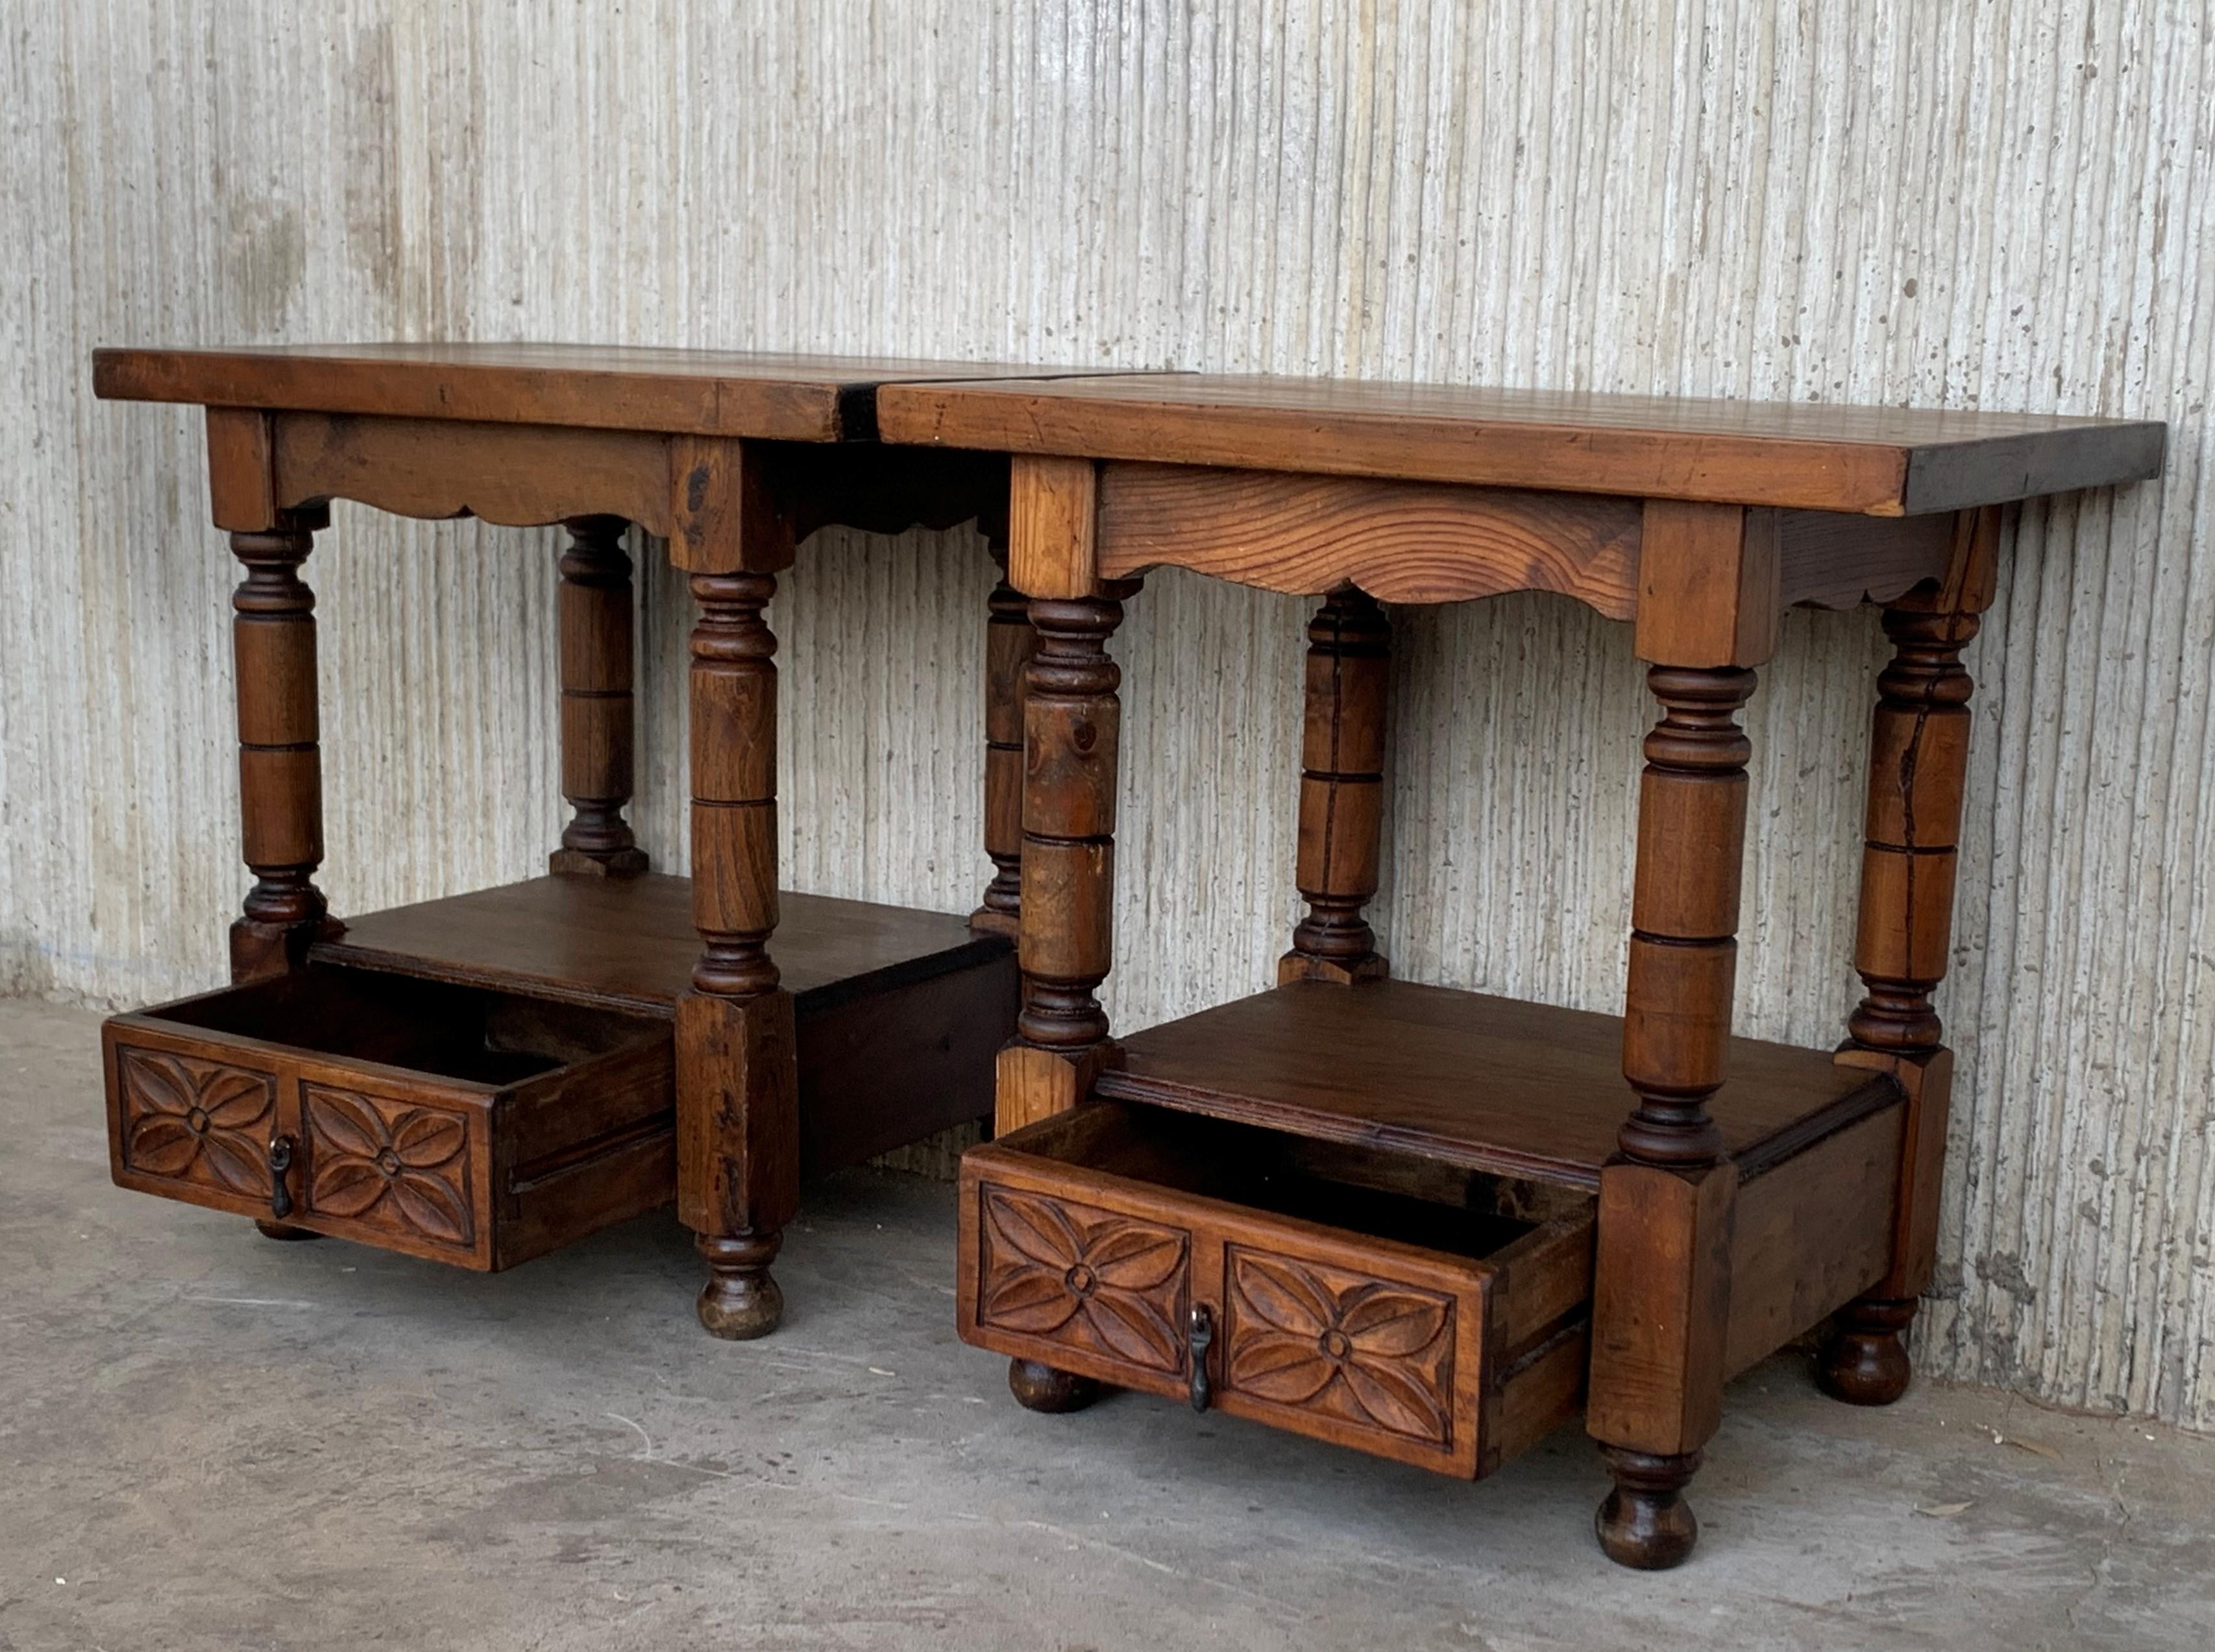 20th Century Pair of Catalan, Spanish Nightstands with Drawers & Low Open Shelf 1